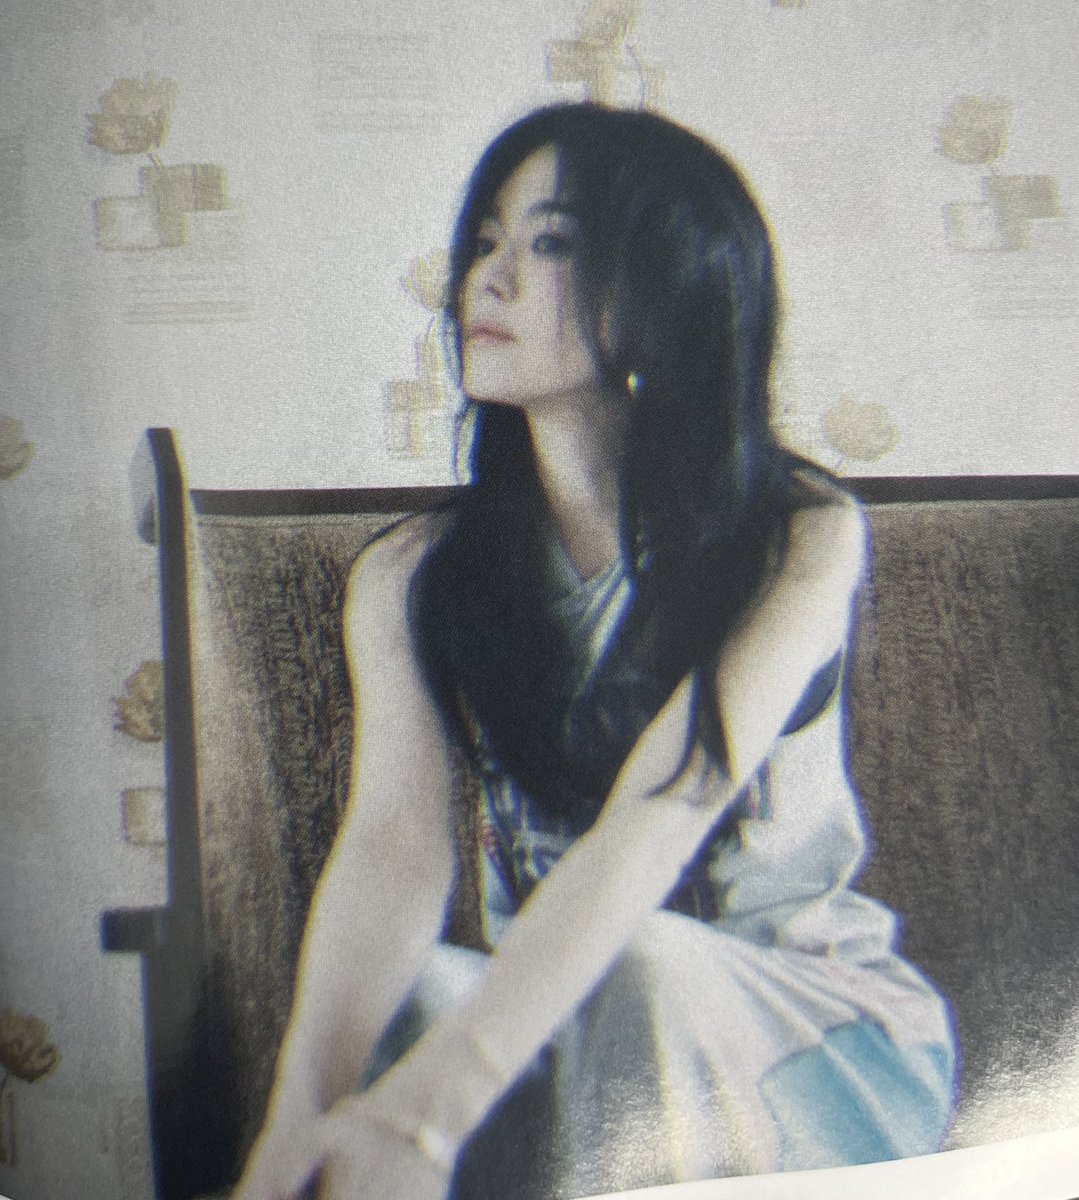 My favorite part of this interview with #SongHyeKyo: 'I don't have any grand goals. My dream now is to grow old gracefully. I'm happy right now, living a simple life without much happening, neither being extremely happy nor unhappy. I am thankful that each day passes quietly